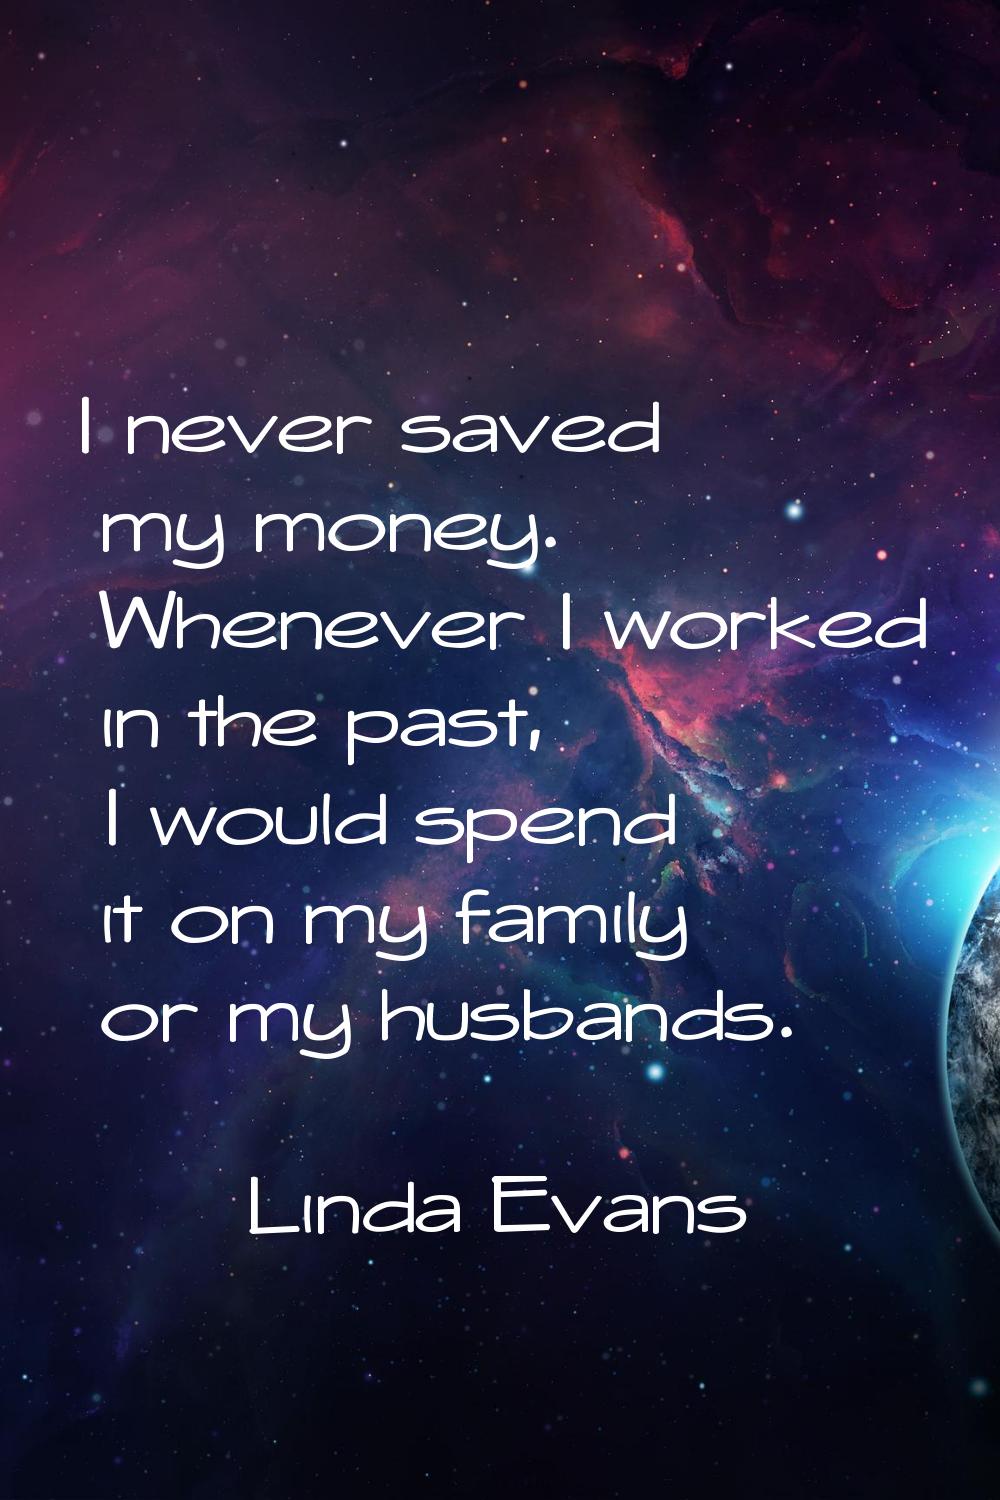 I never saved my money. Whenever I worked in the past, I would spend it on my family or my husbands